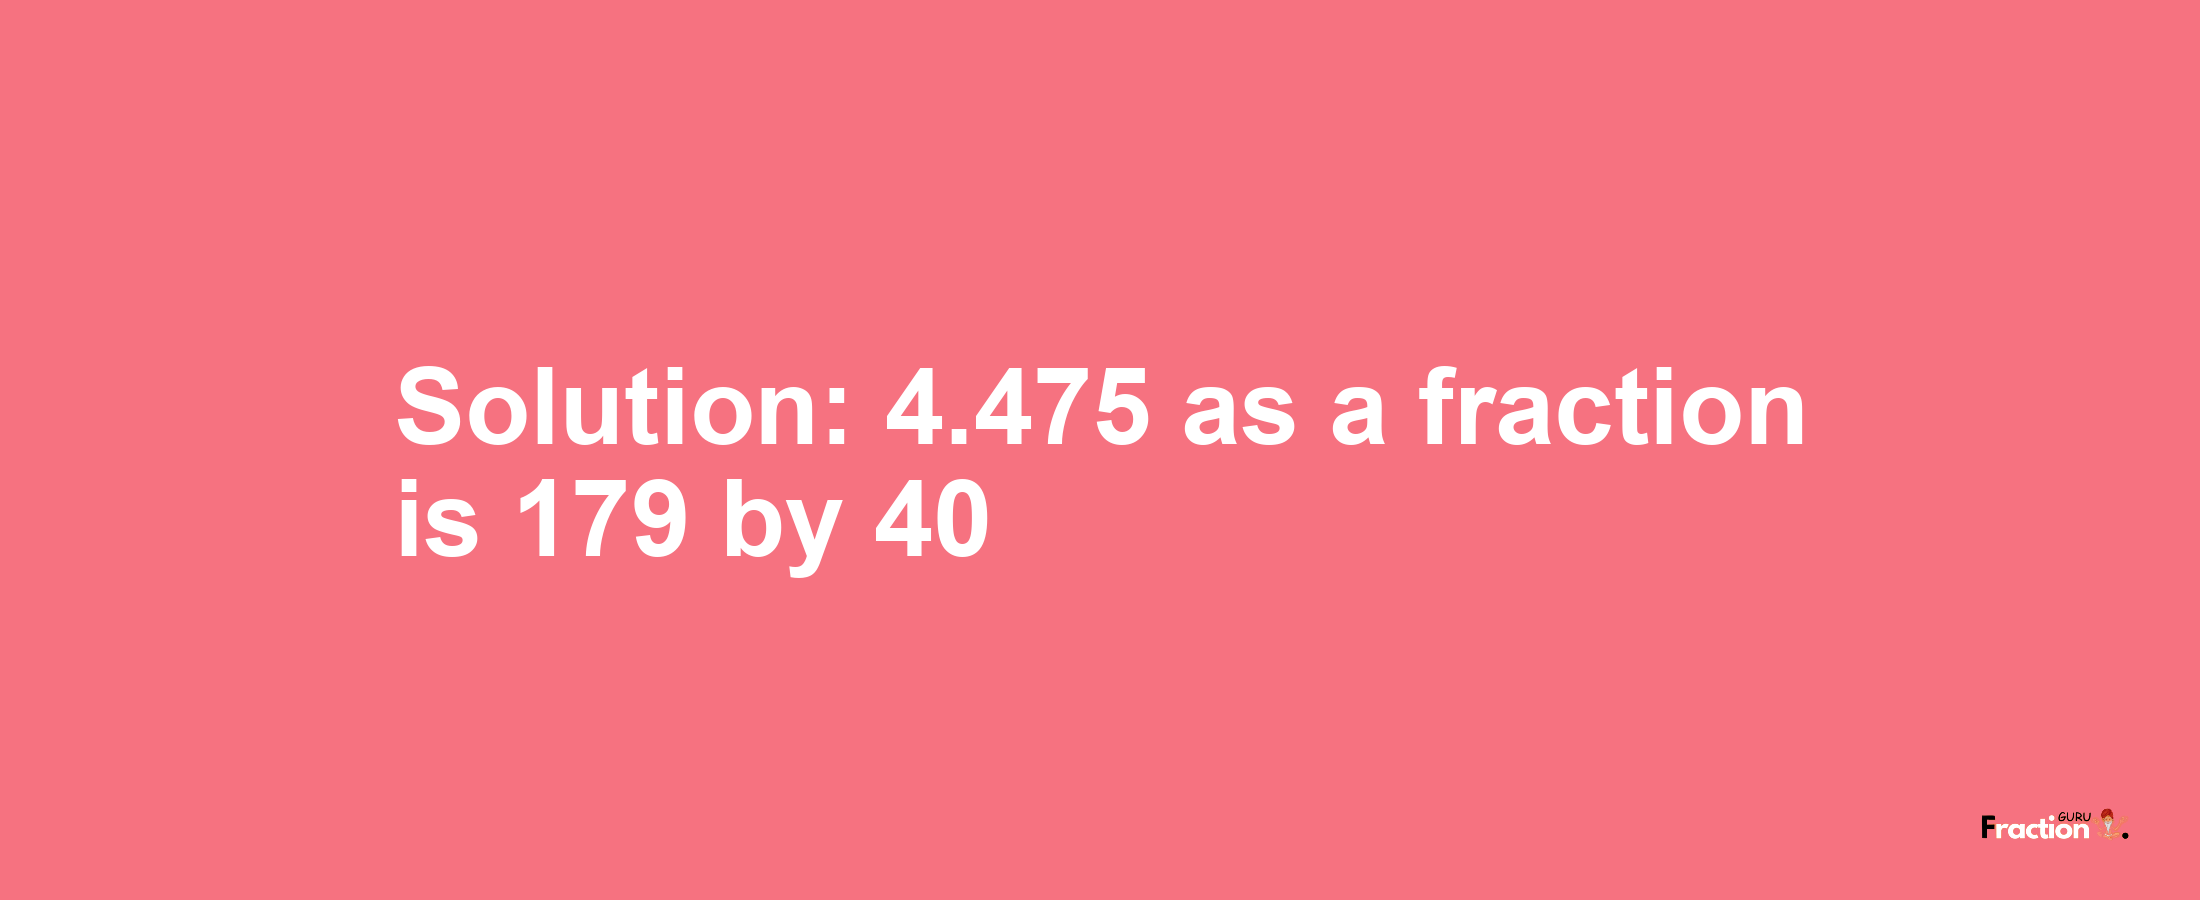 Solution:4.475 as a fraction is 179/40